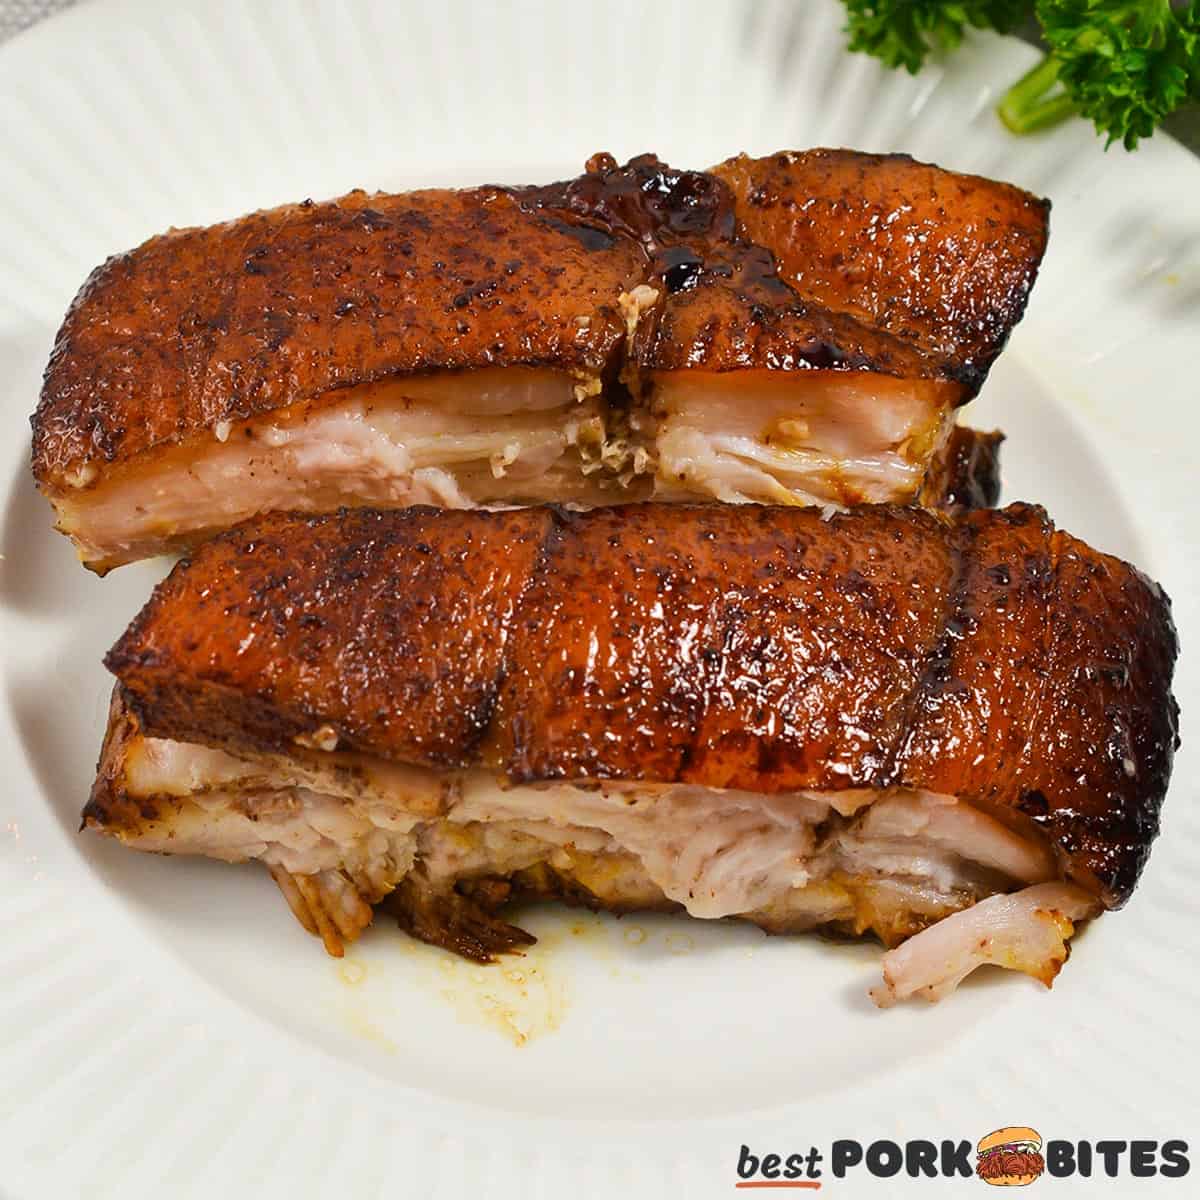 slices of roasted pork belly on a white plate with parsley